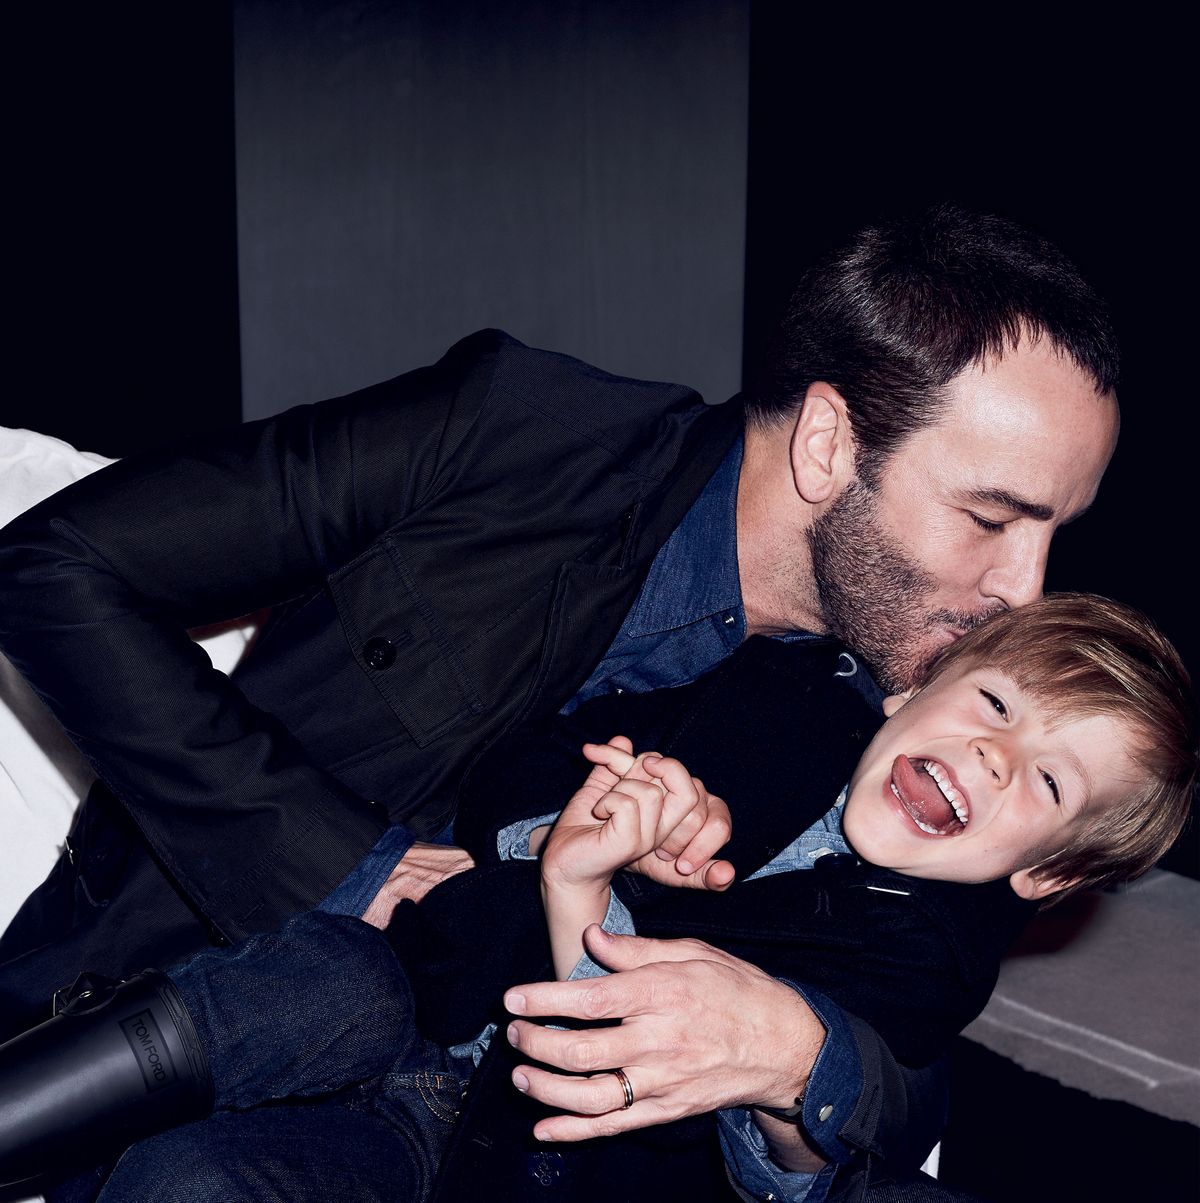 Tom Ford is a fashion designer I aspire to be like the most in